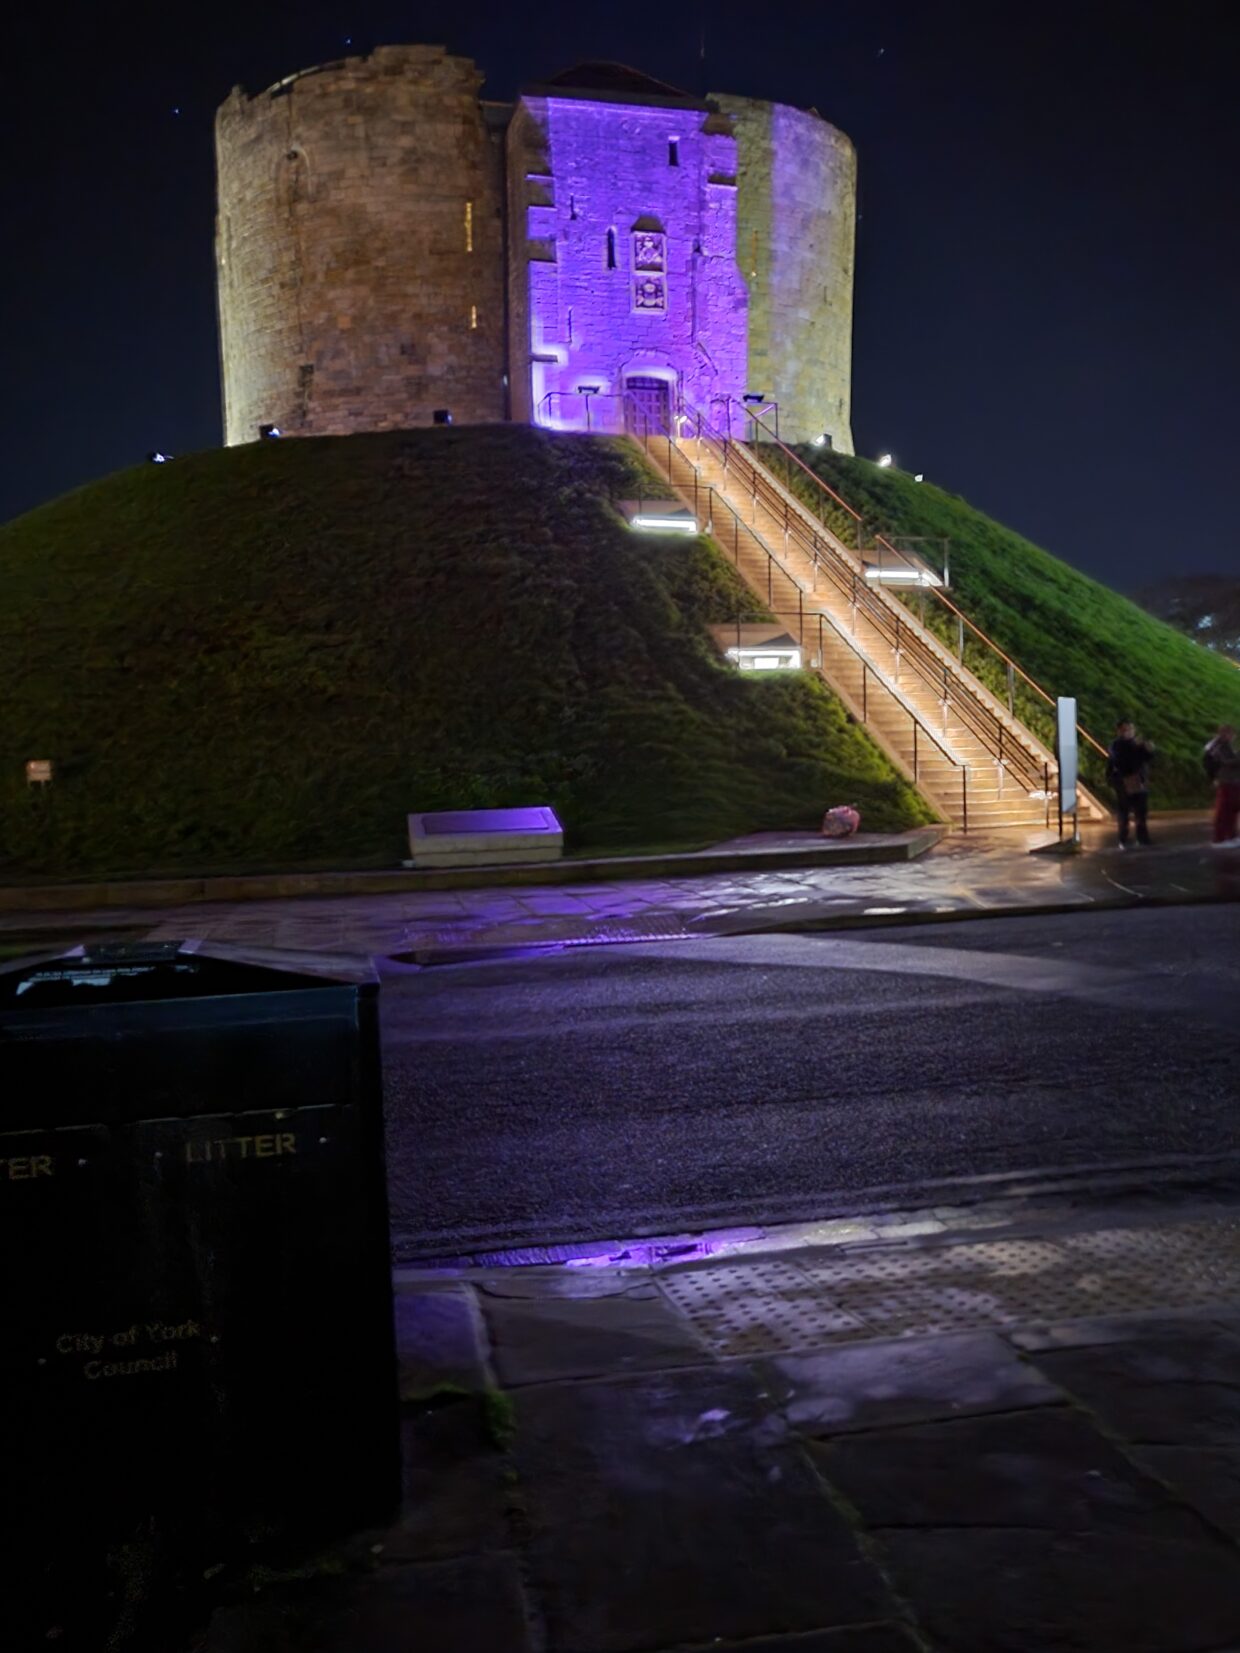 Cliffords Tower on Bonfire Night. The sky is dark and a purple light lights up Clifford's Tower.